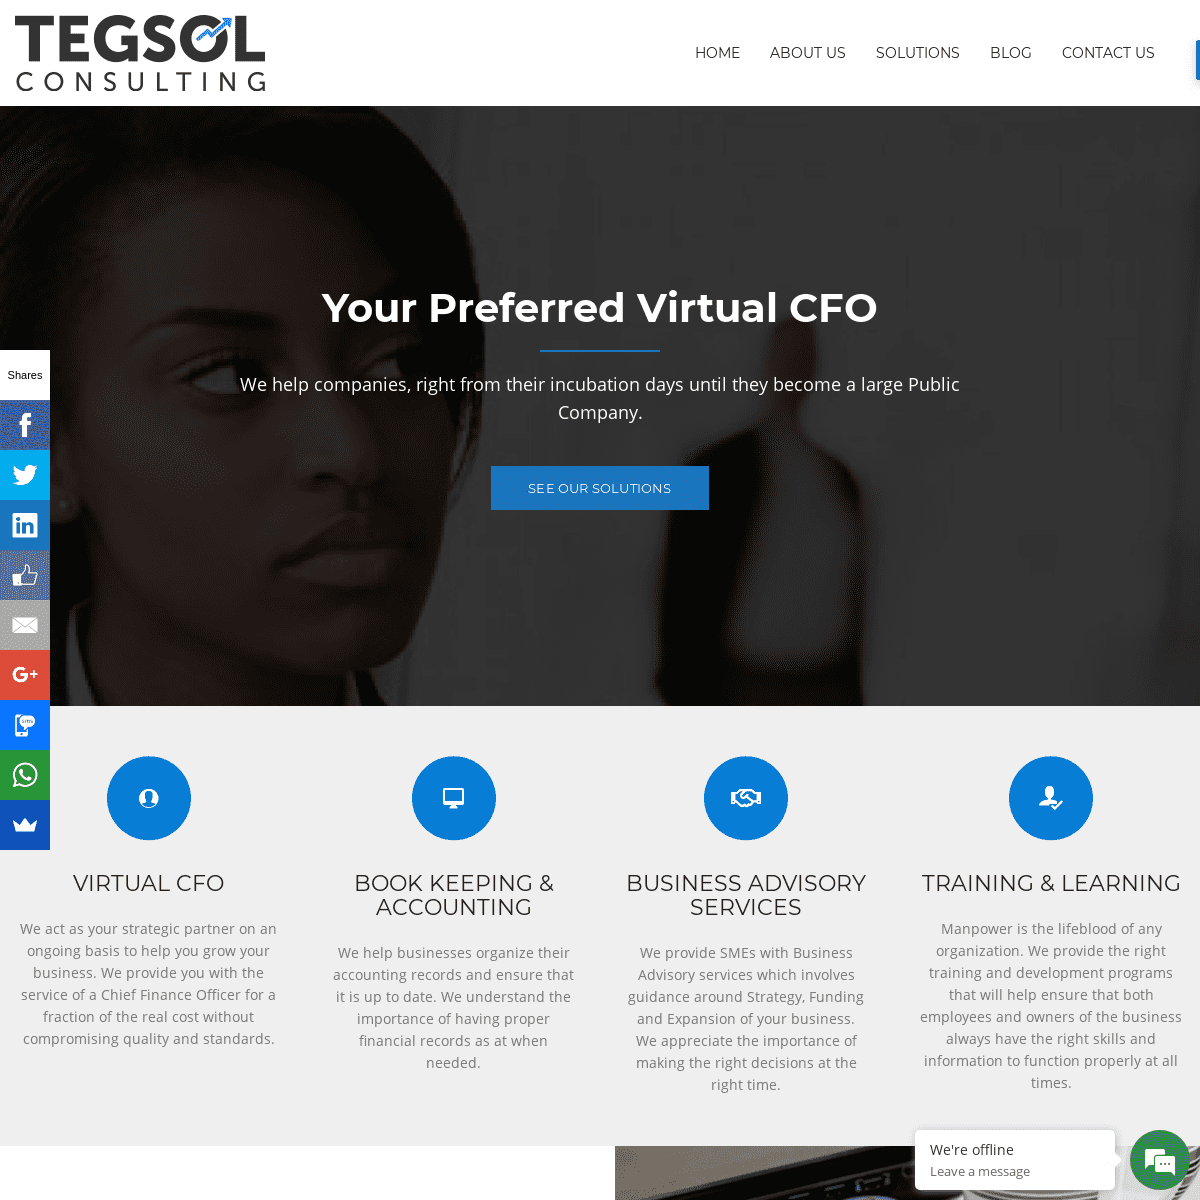 A complete backup of tegsolconsulting.com